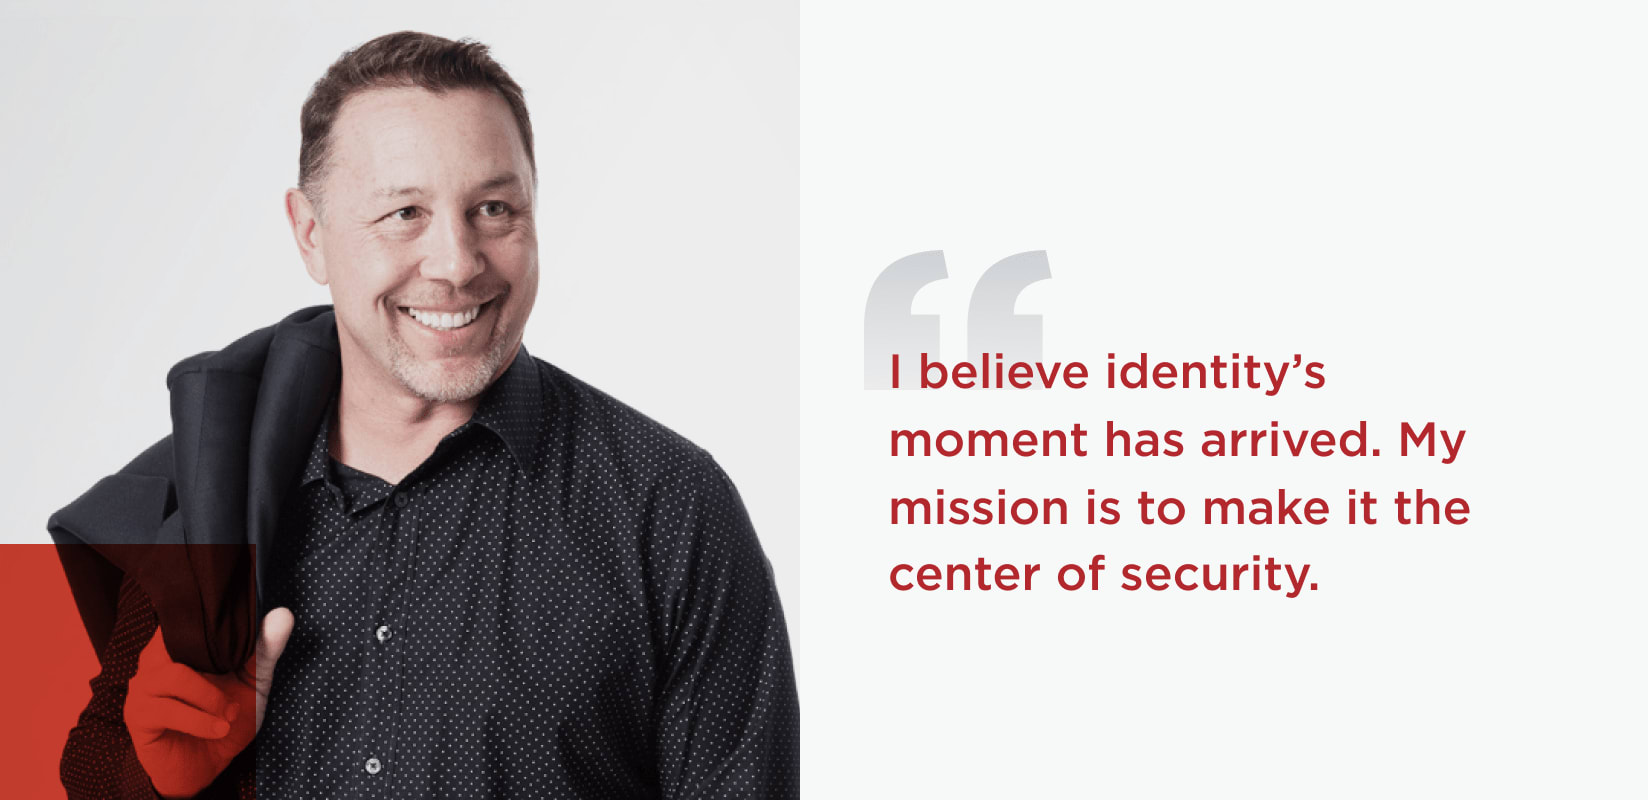 Quote from Andre Durand, Chief Executive Officer. I believe identity's moment has arrived. My mission is to make it the center of security.